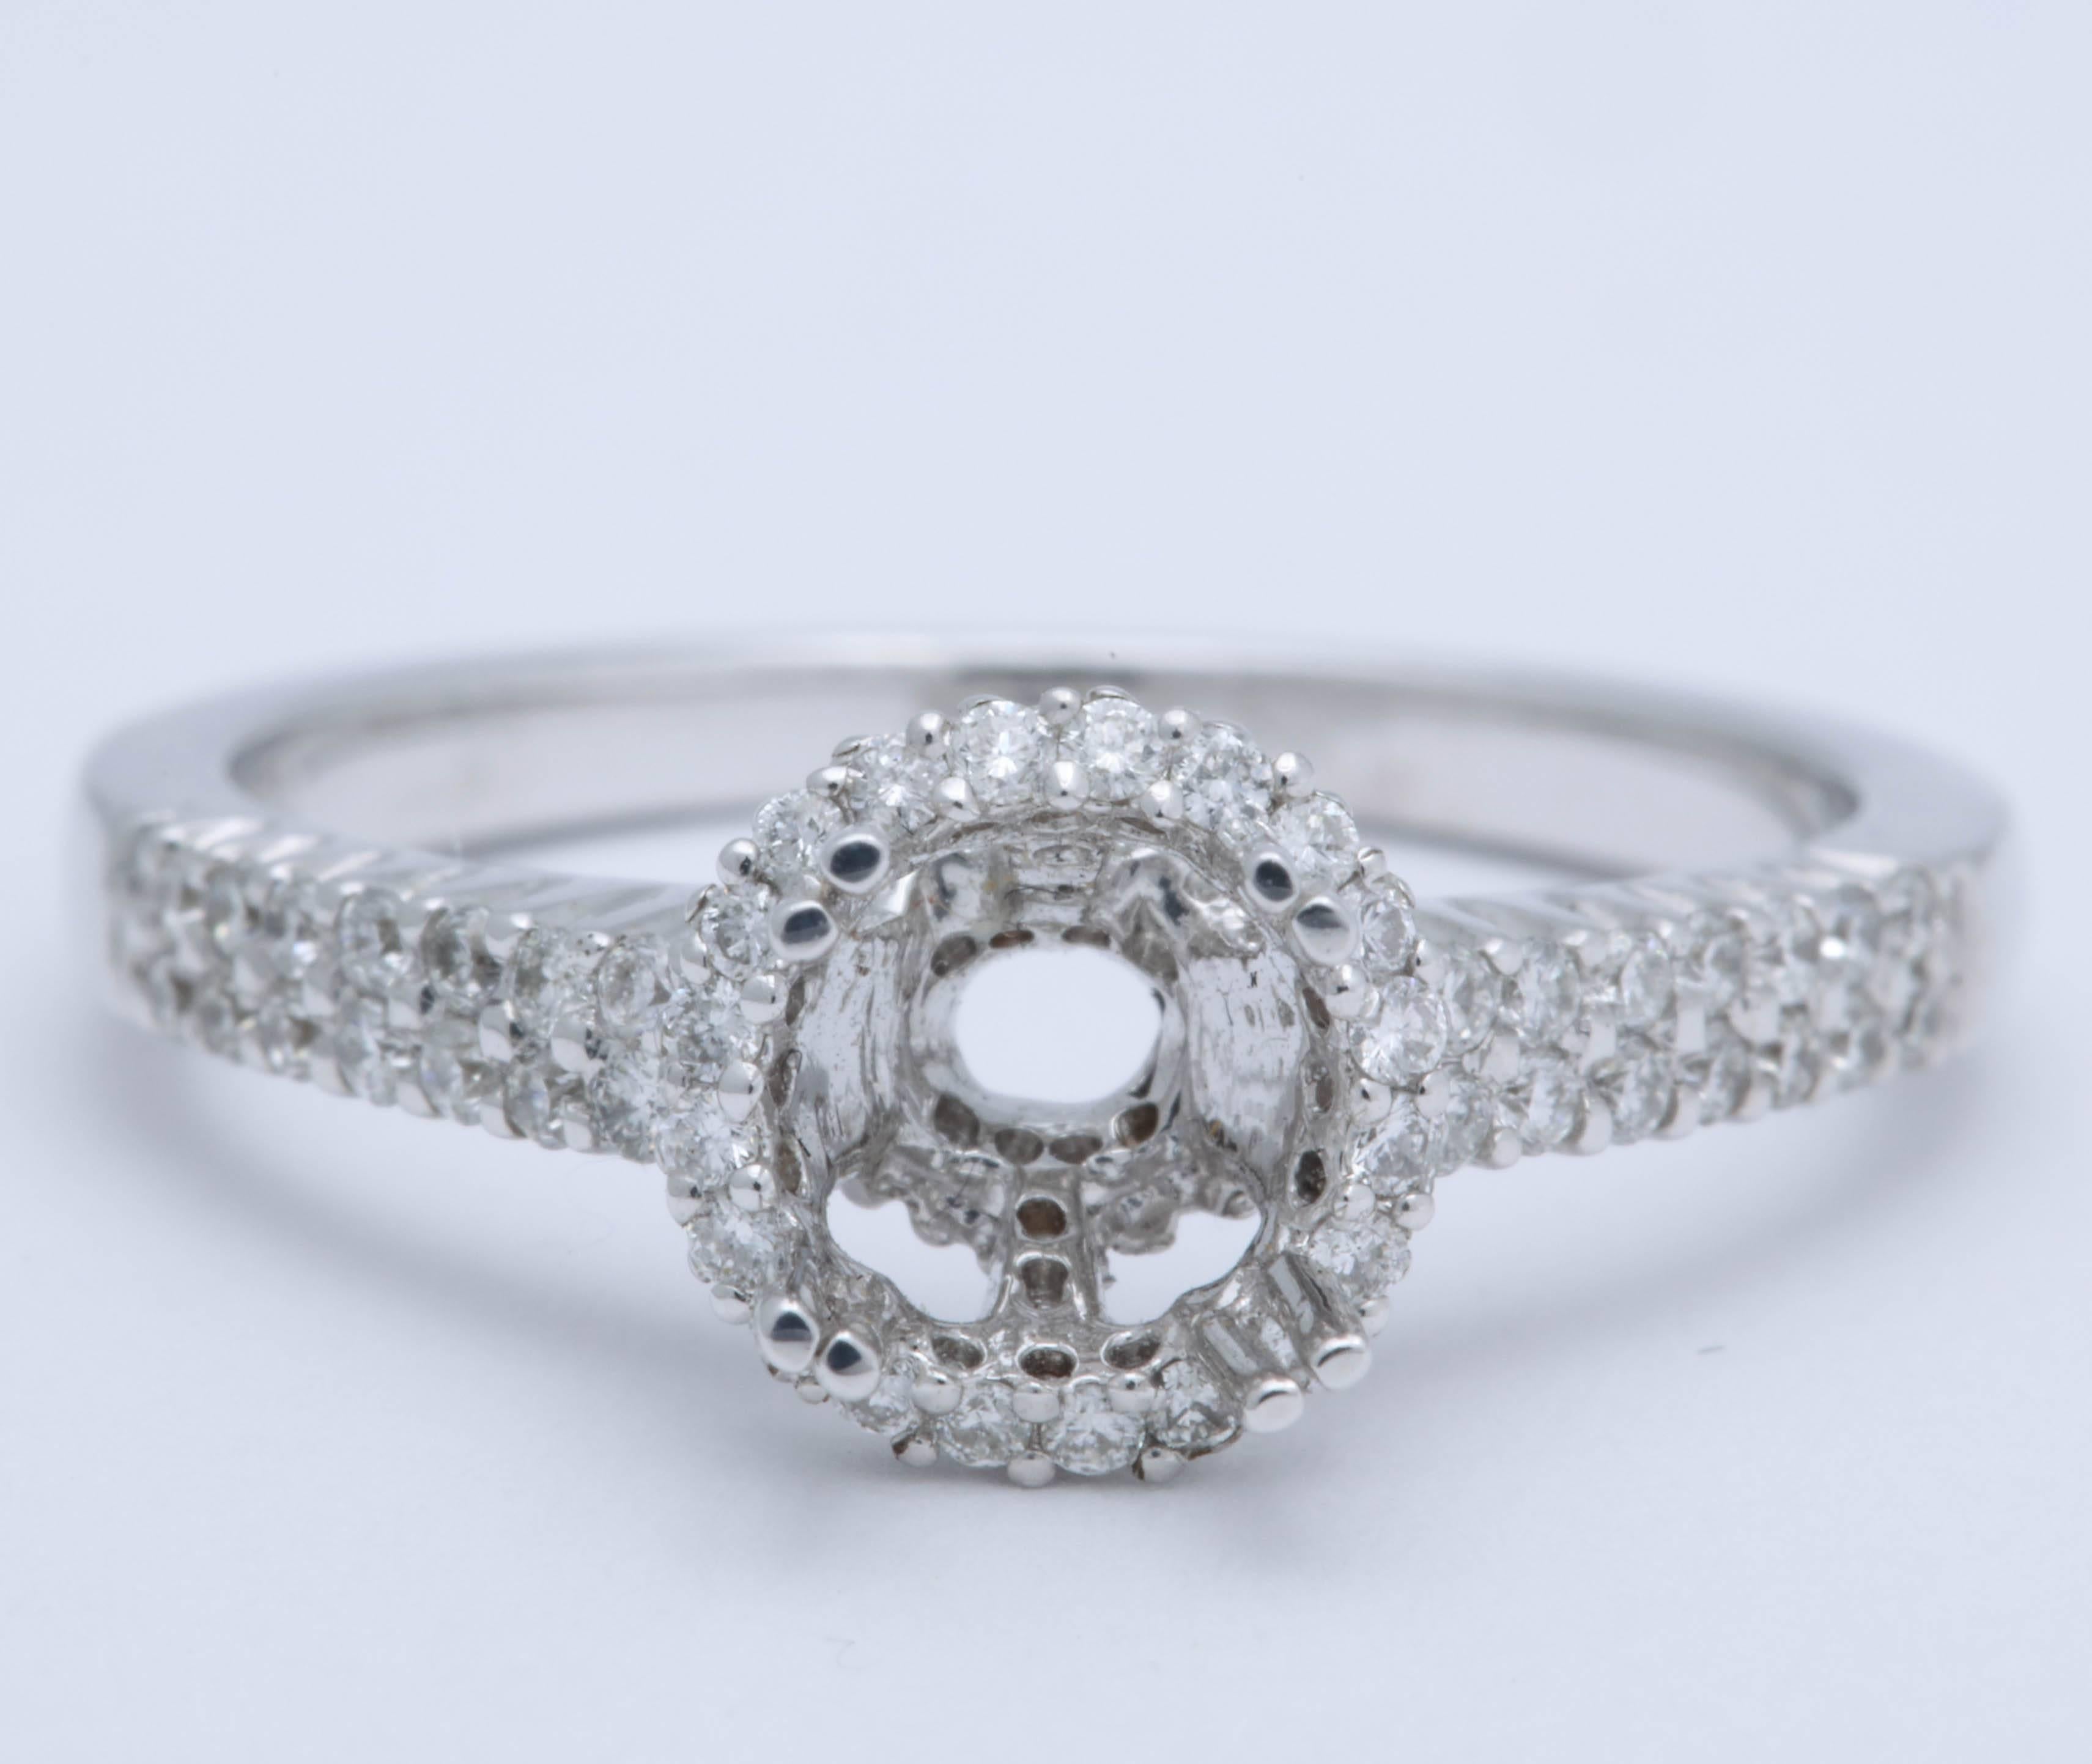 This mounting is 18 kt white gold and has 1 ct  microset diamonds set in a Halo style.. It can be set with a center stone between .75 ct to 1.25 ct.  The ring is 6 3/4 and can be sized. A great setting to modernize your engagement ring or for a new